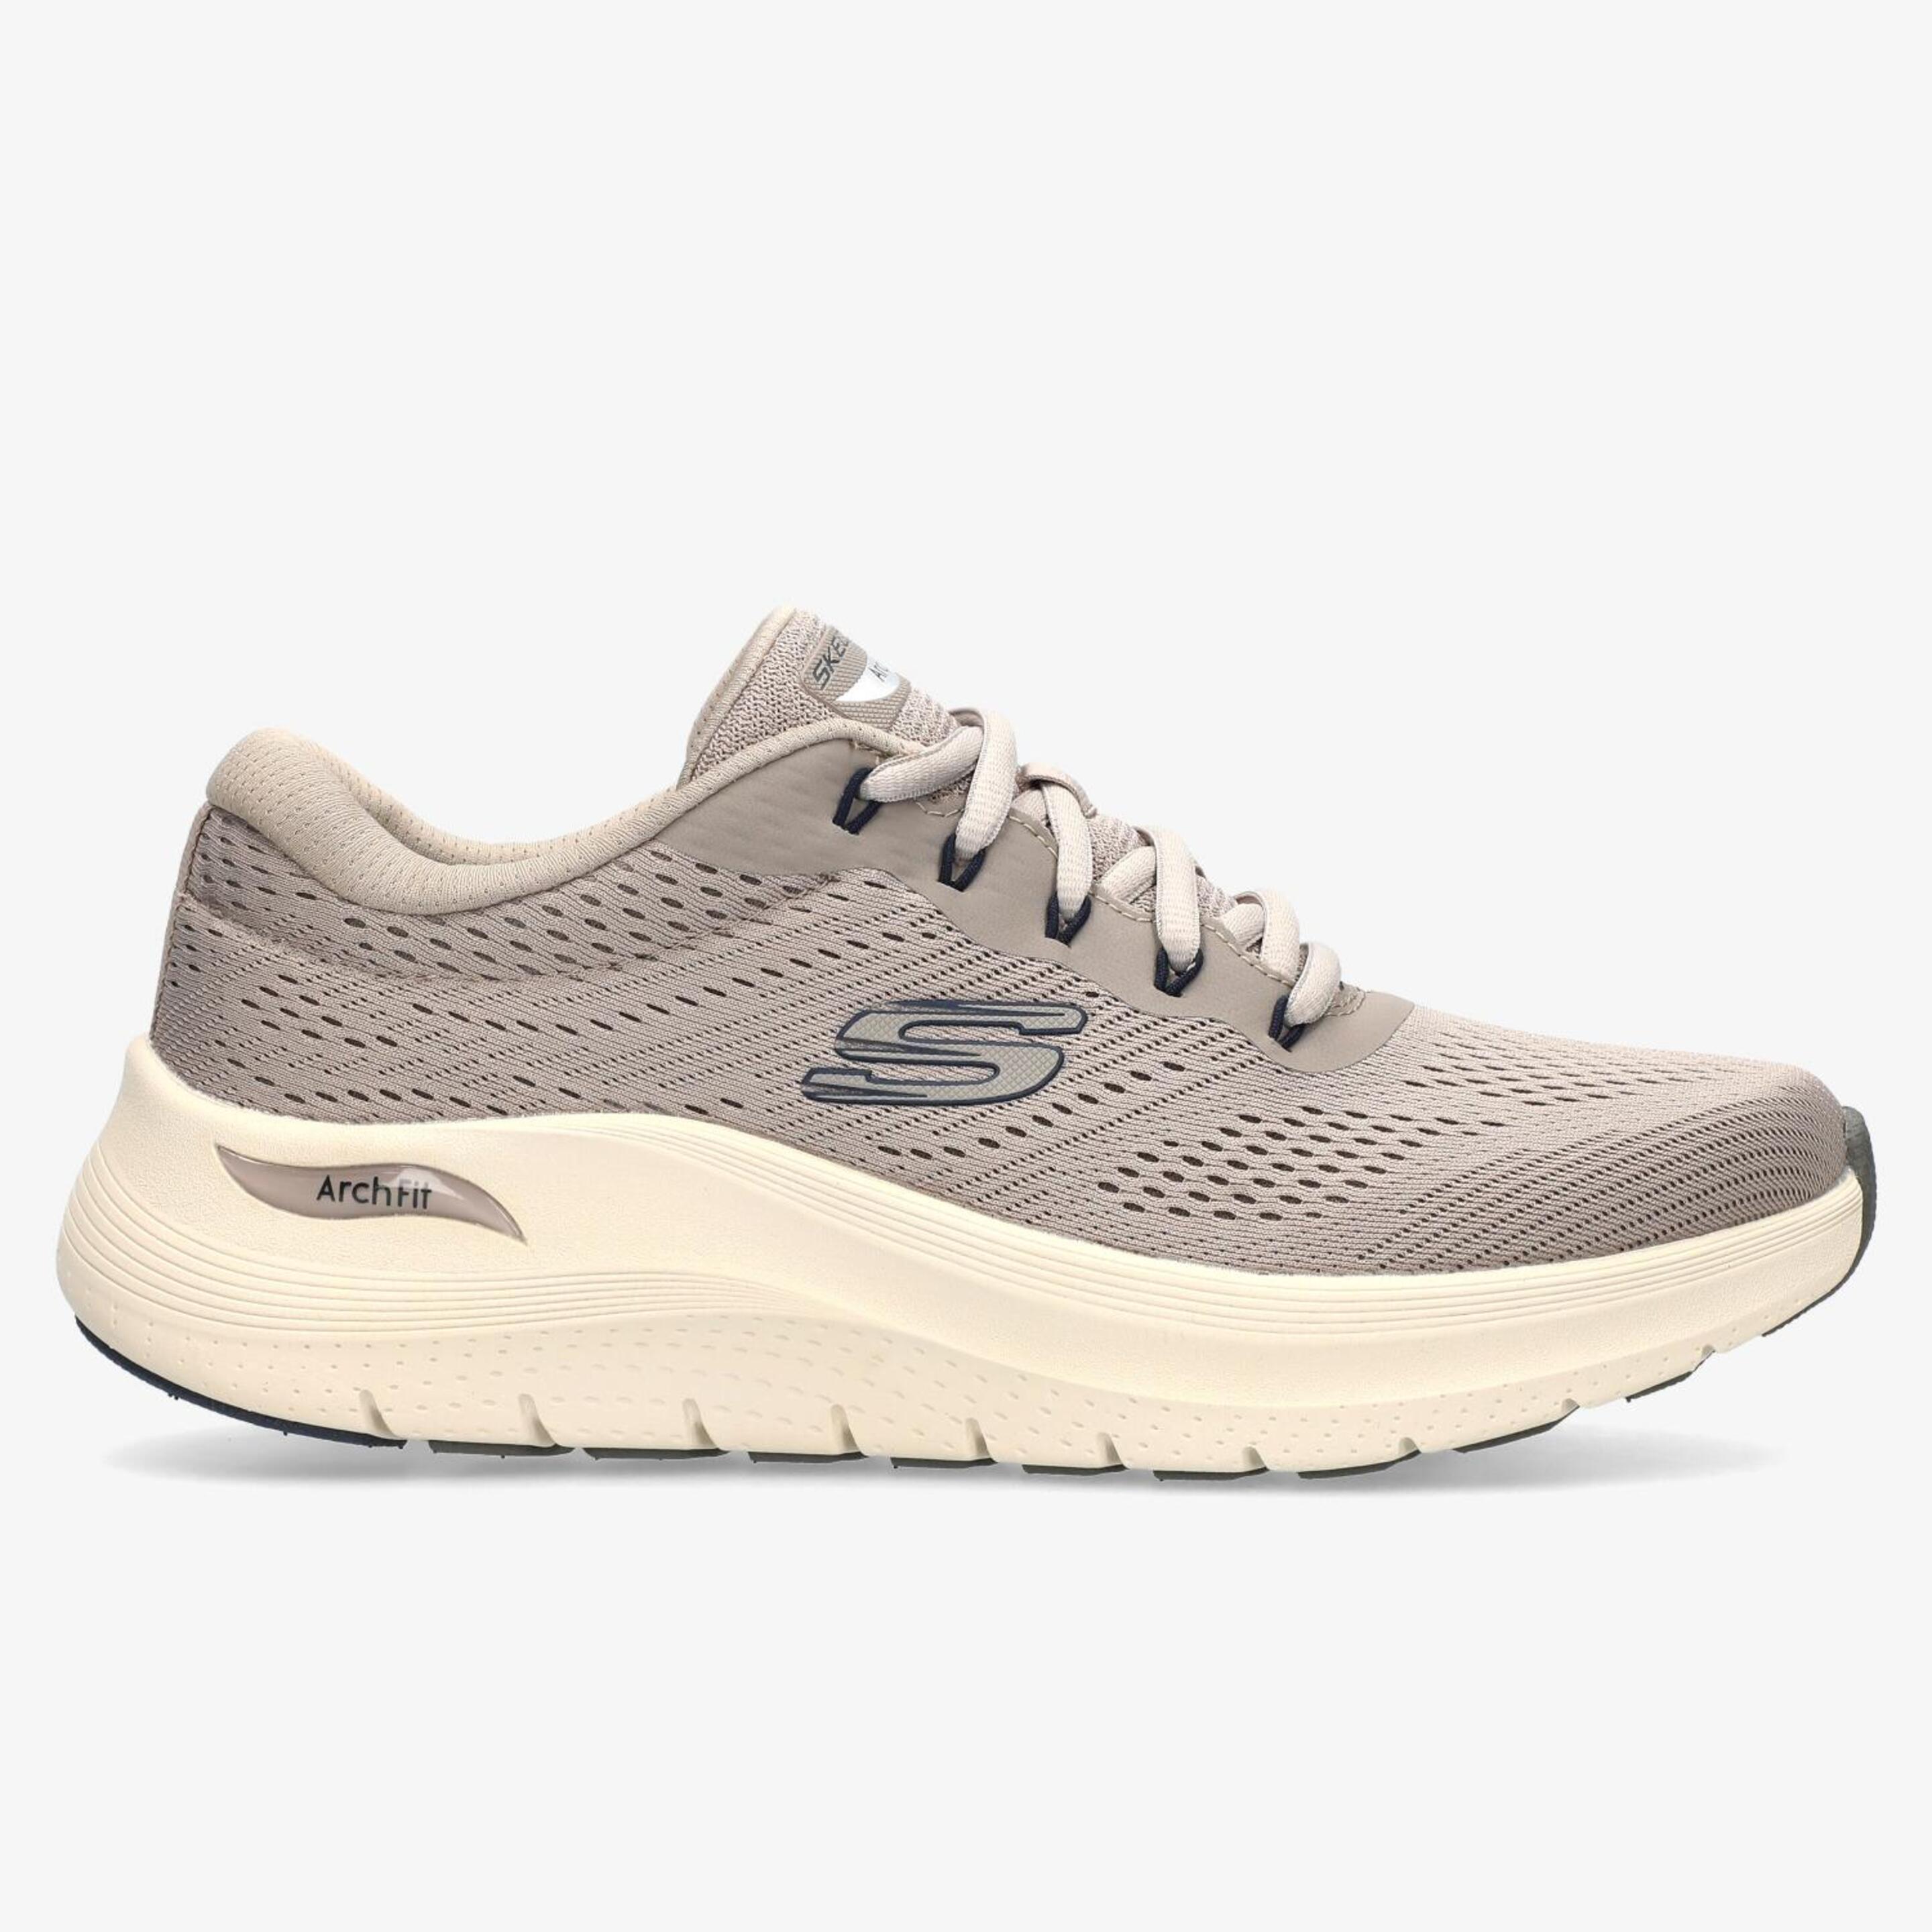 Skechers Arch Fit 2.0 - Taupe - Zapatillas Running Hombre